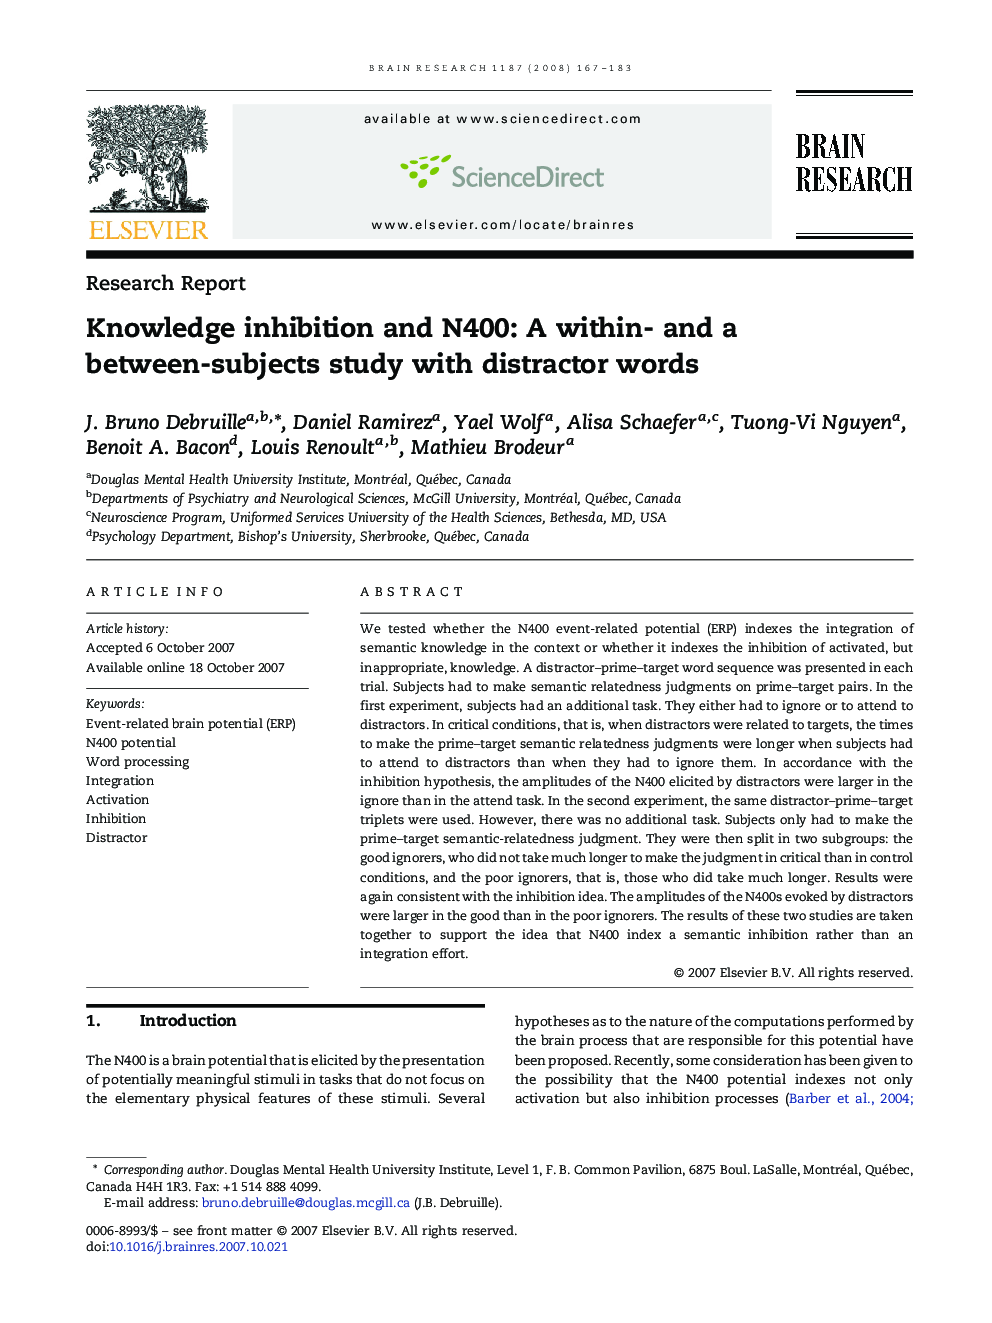 Knowledge inhibition and N400: A within- and a between-subjects study with distractor words